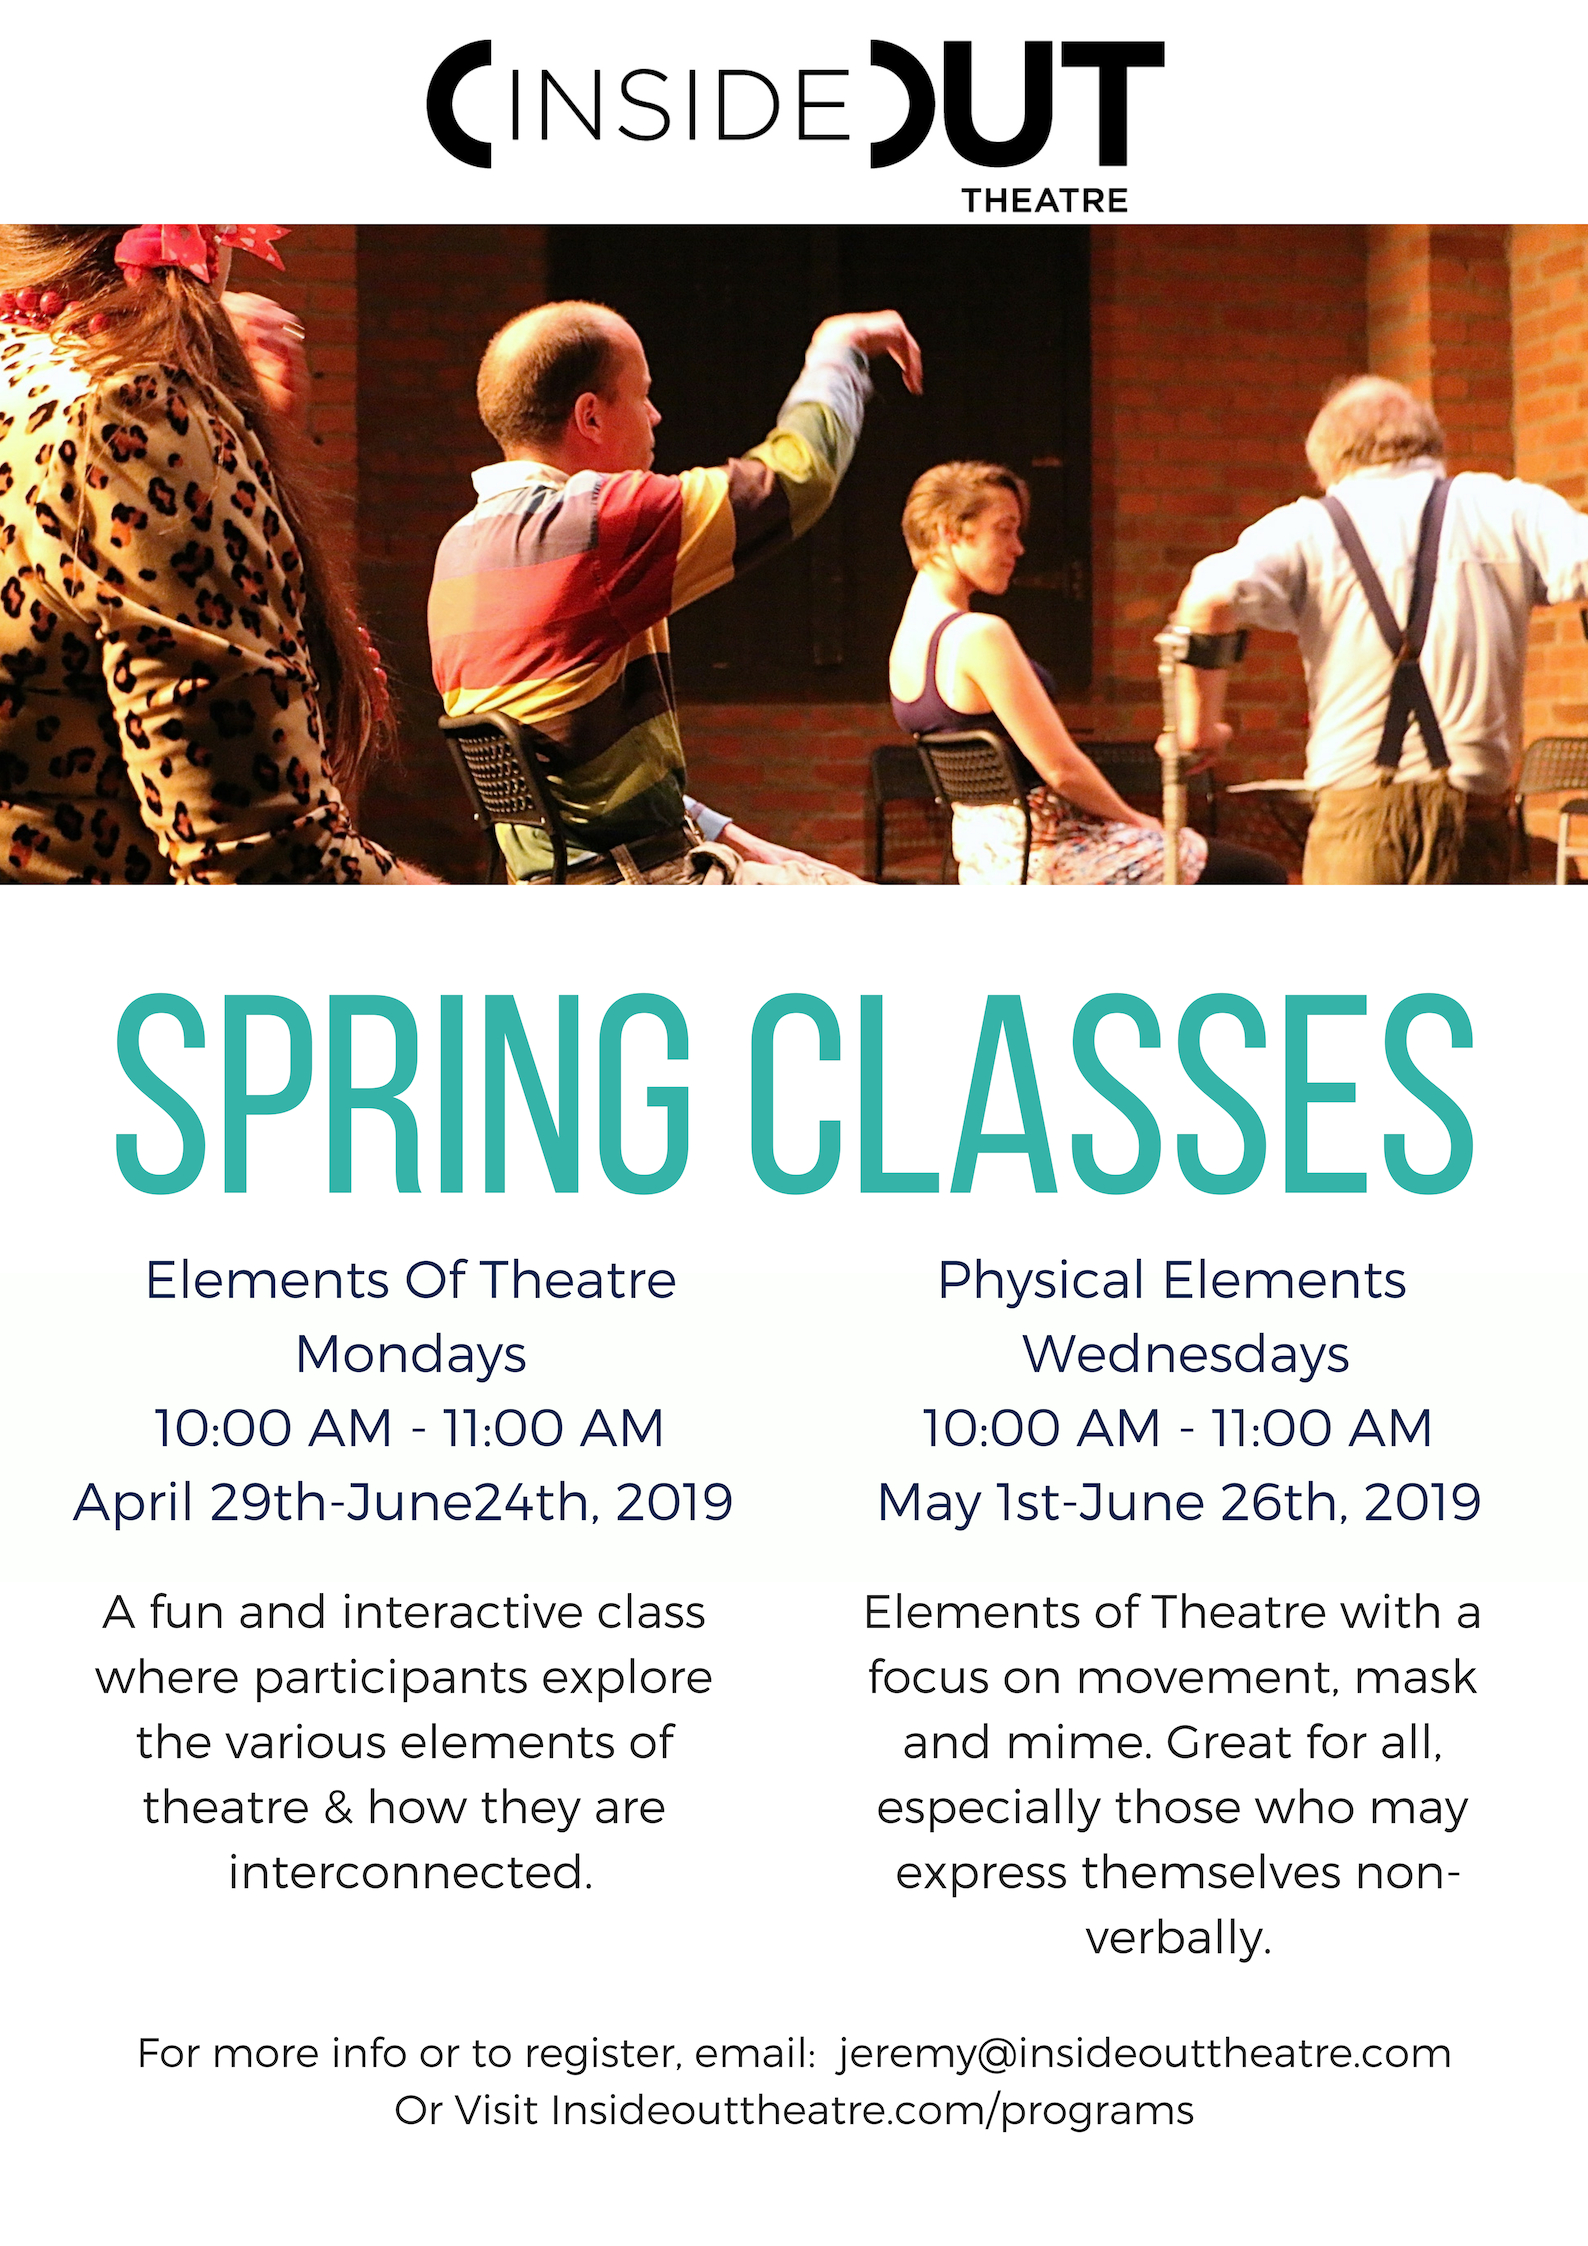 Info card for Inside Out Theatre – Spring Classes